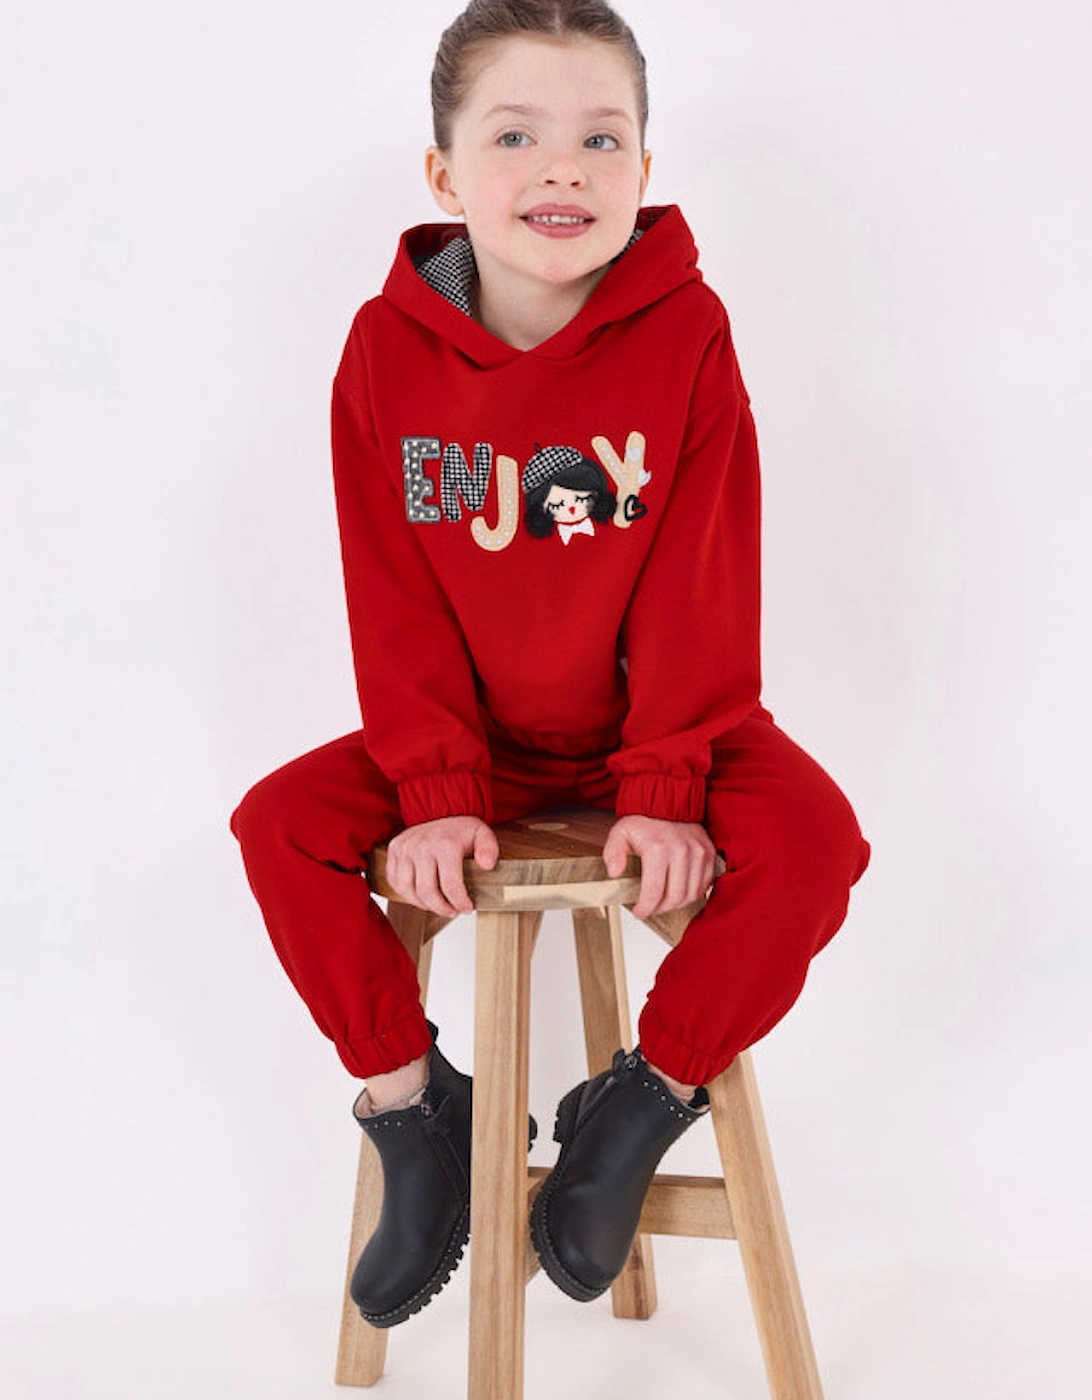 Red Hooded Tracksuit